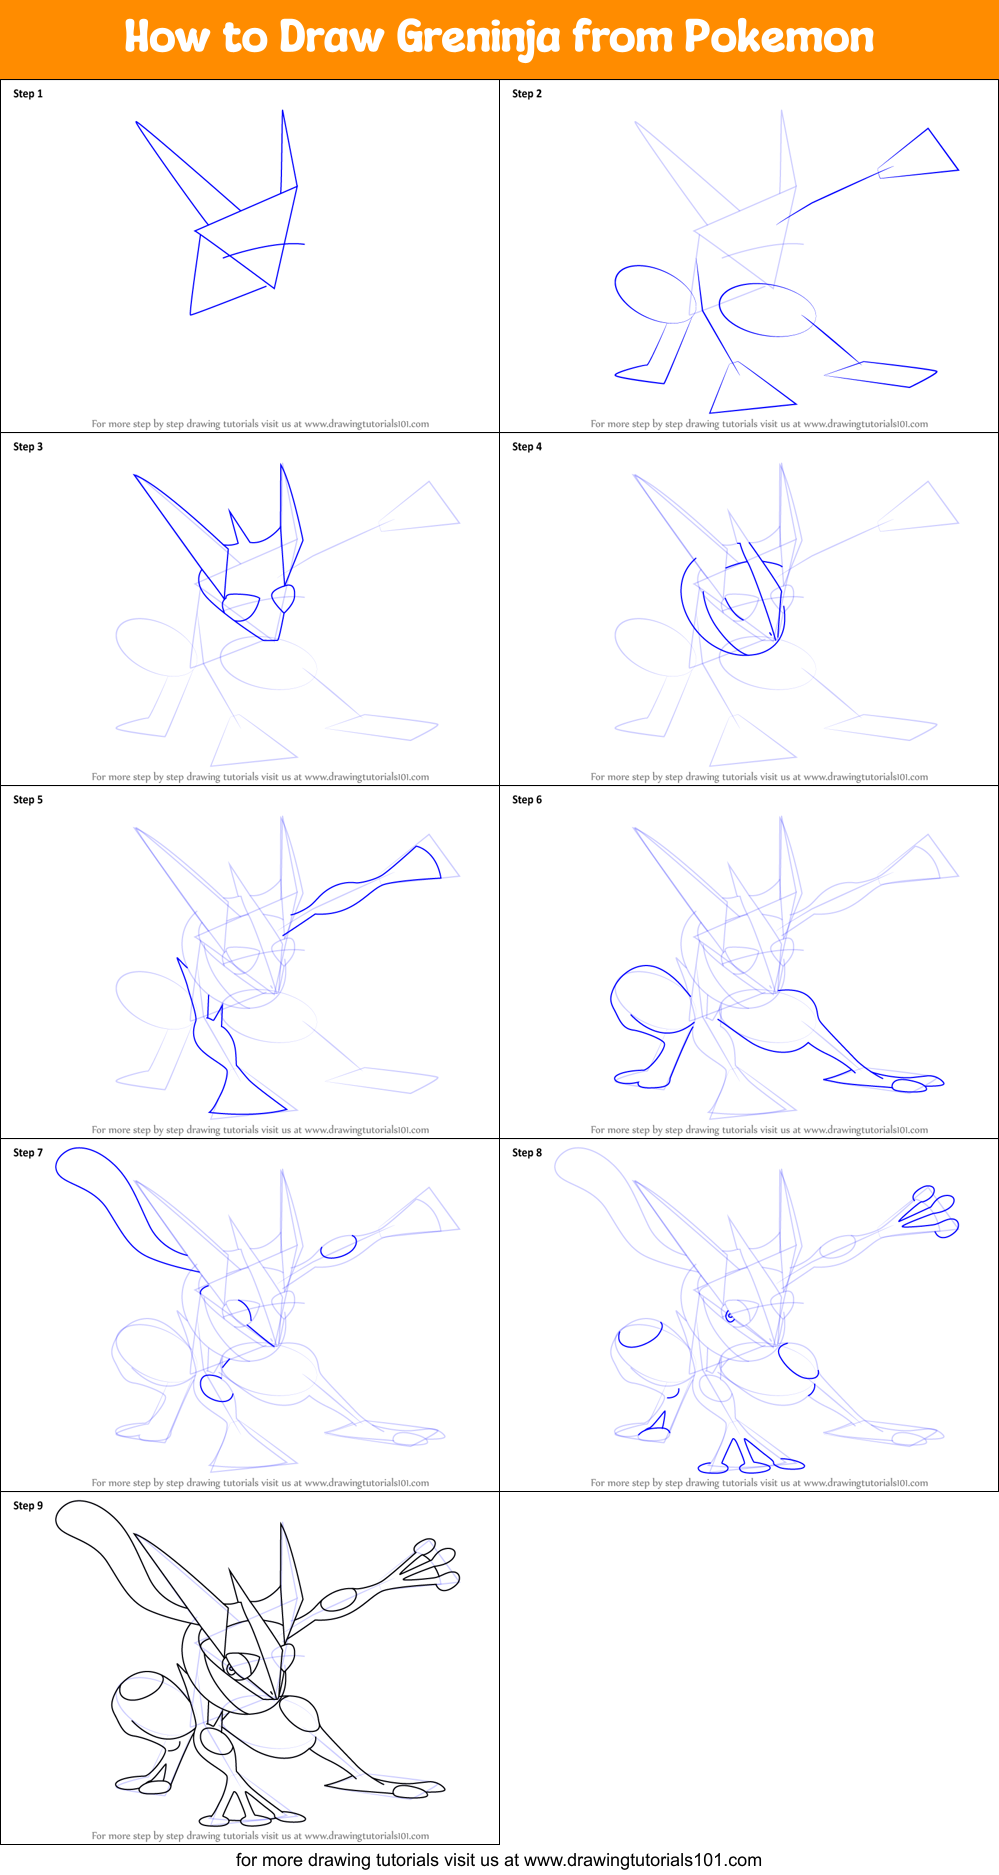 How to Draw Greninja from Pokemon printable step by step drawing sheet